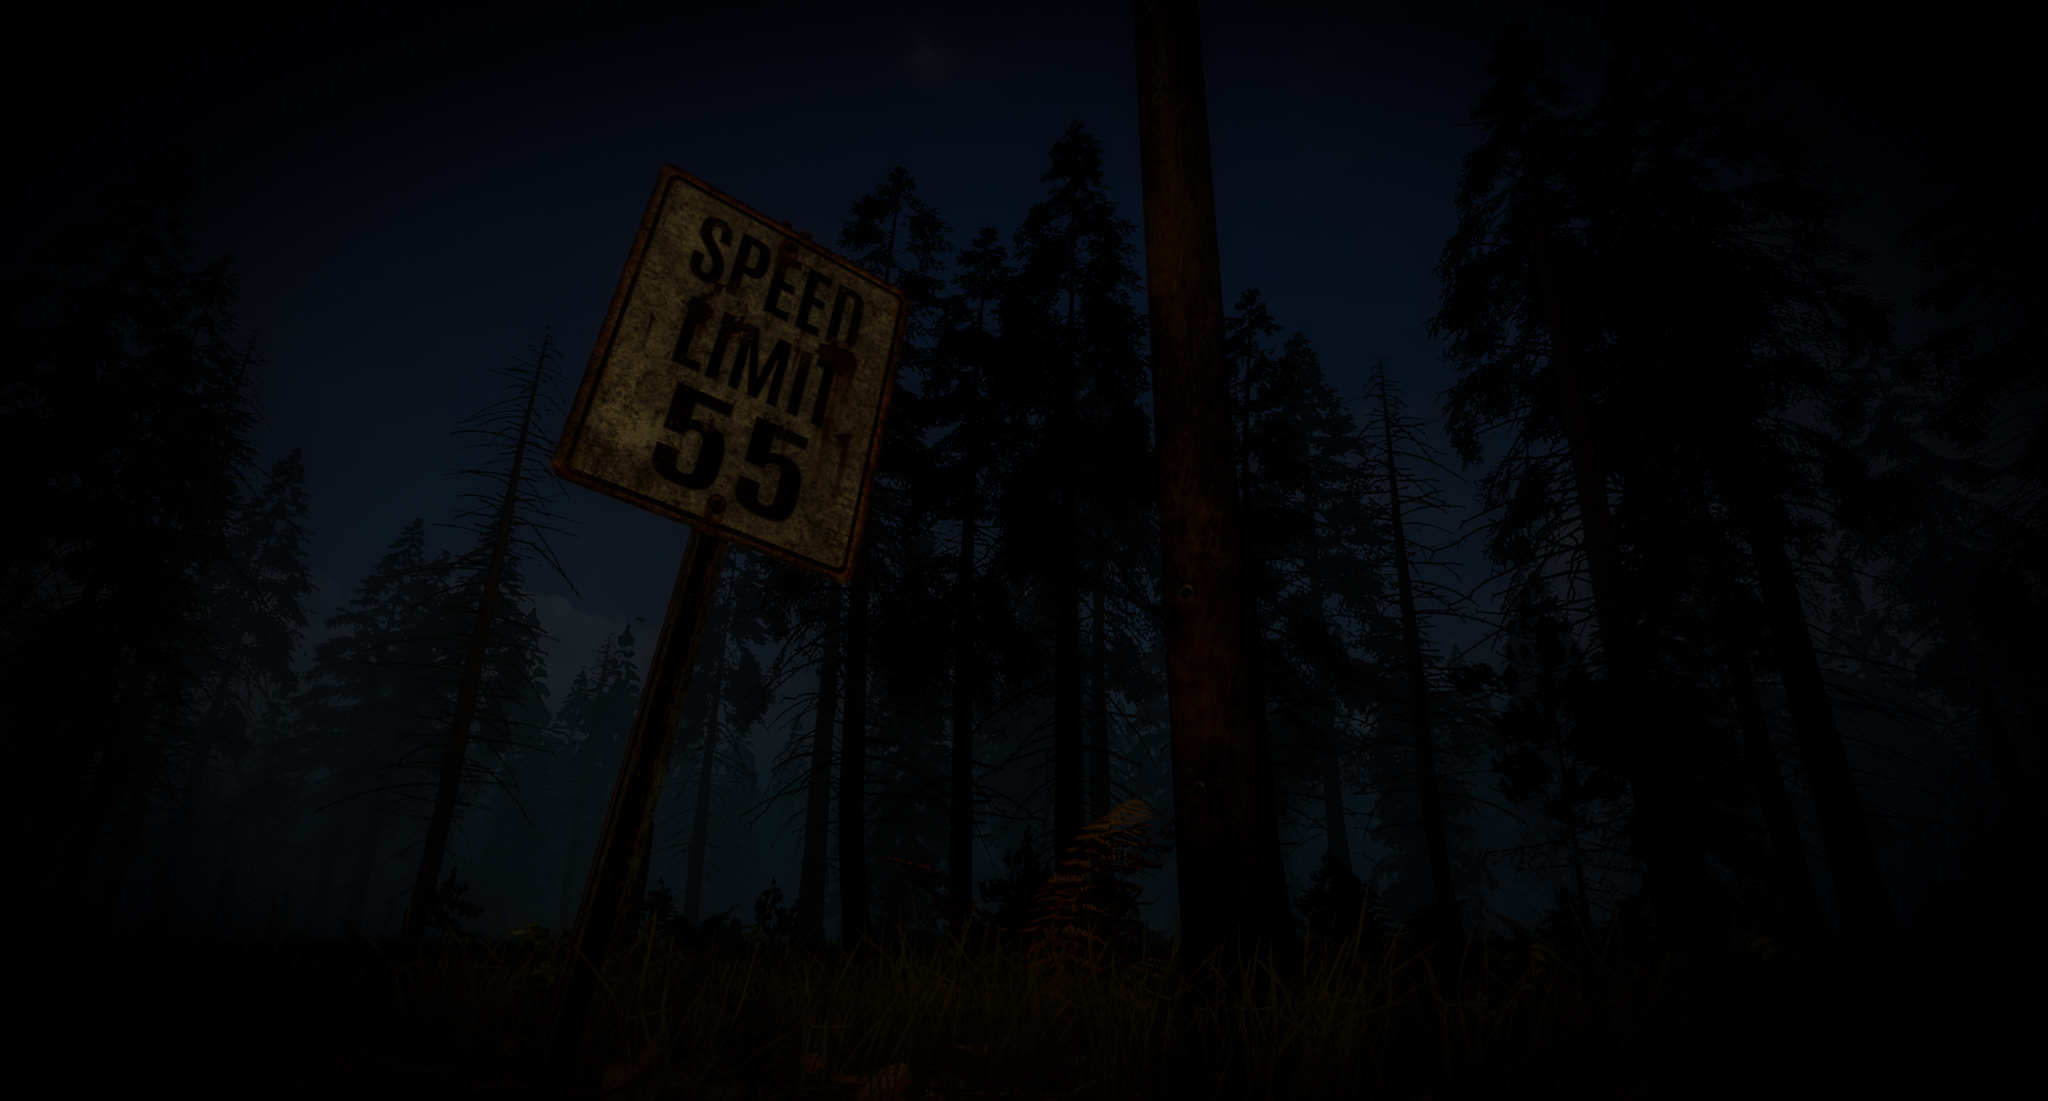 The first At Night Screenshot shows a 55mp/h speed limit sign